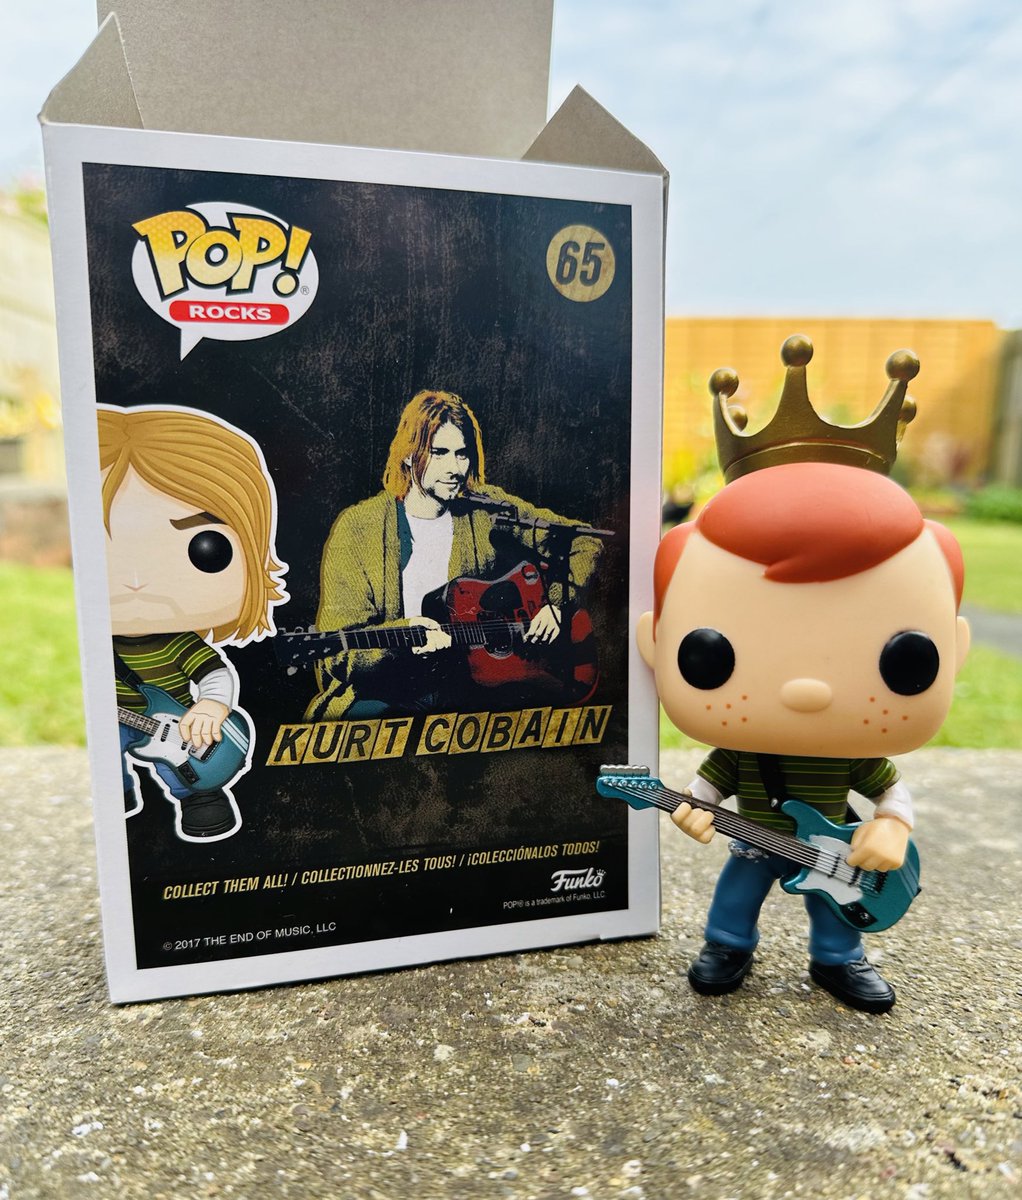 Picked up this Freddy/Kurt Cobain custom for an absolute steal! 🎸 As soon as I saw it I just loved the look of it so I thought it was definitely worth adding to the collection & I’m so happy I did! He is super cool. 😍

#FunkoPOPVinyl #MyFunkoStory #FunkoUnboxed #Funko